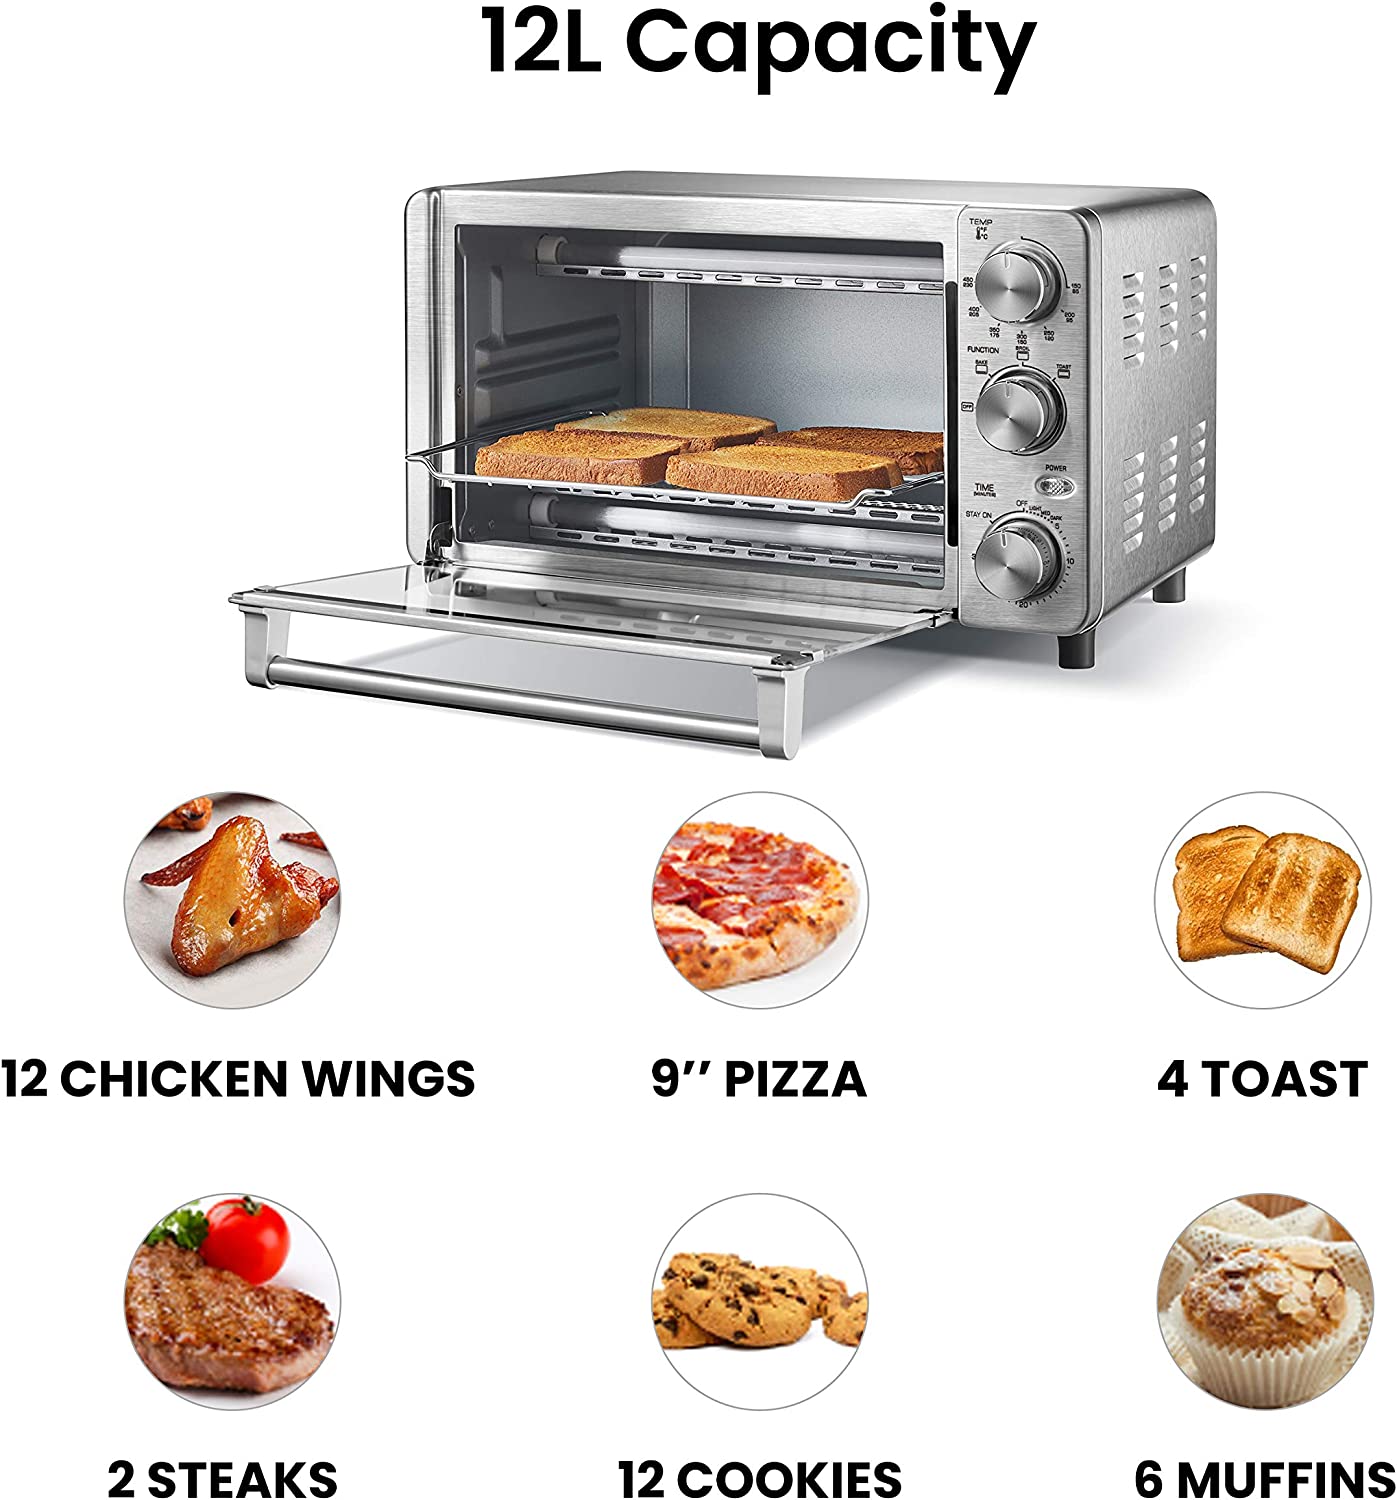 https://discounttoday.net/wp-content/uploads/2022/11/COMFEE-4-Slice-Small-Toaster-Oven-Countertop-12L-with-30-Minute-Timer-3-In-One-Bake-Broil-Toast-1100-Watts-Dual-heating-element-Stainless-SteelCFO-BG12SS3.jpg